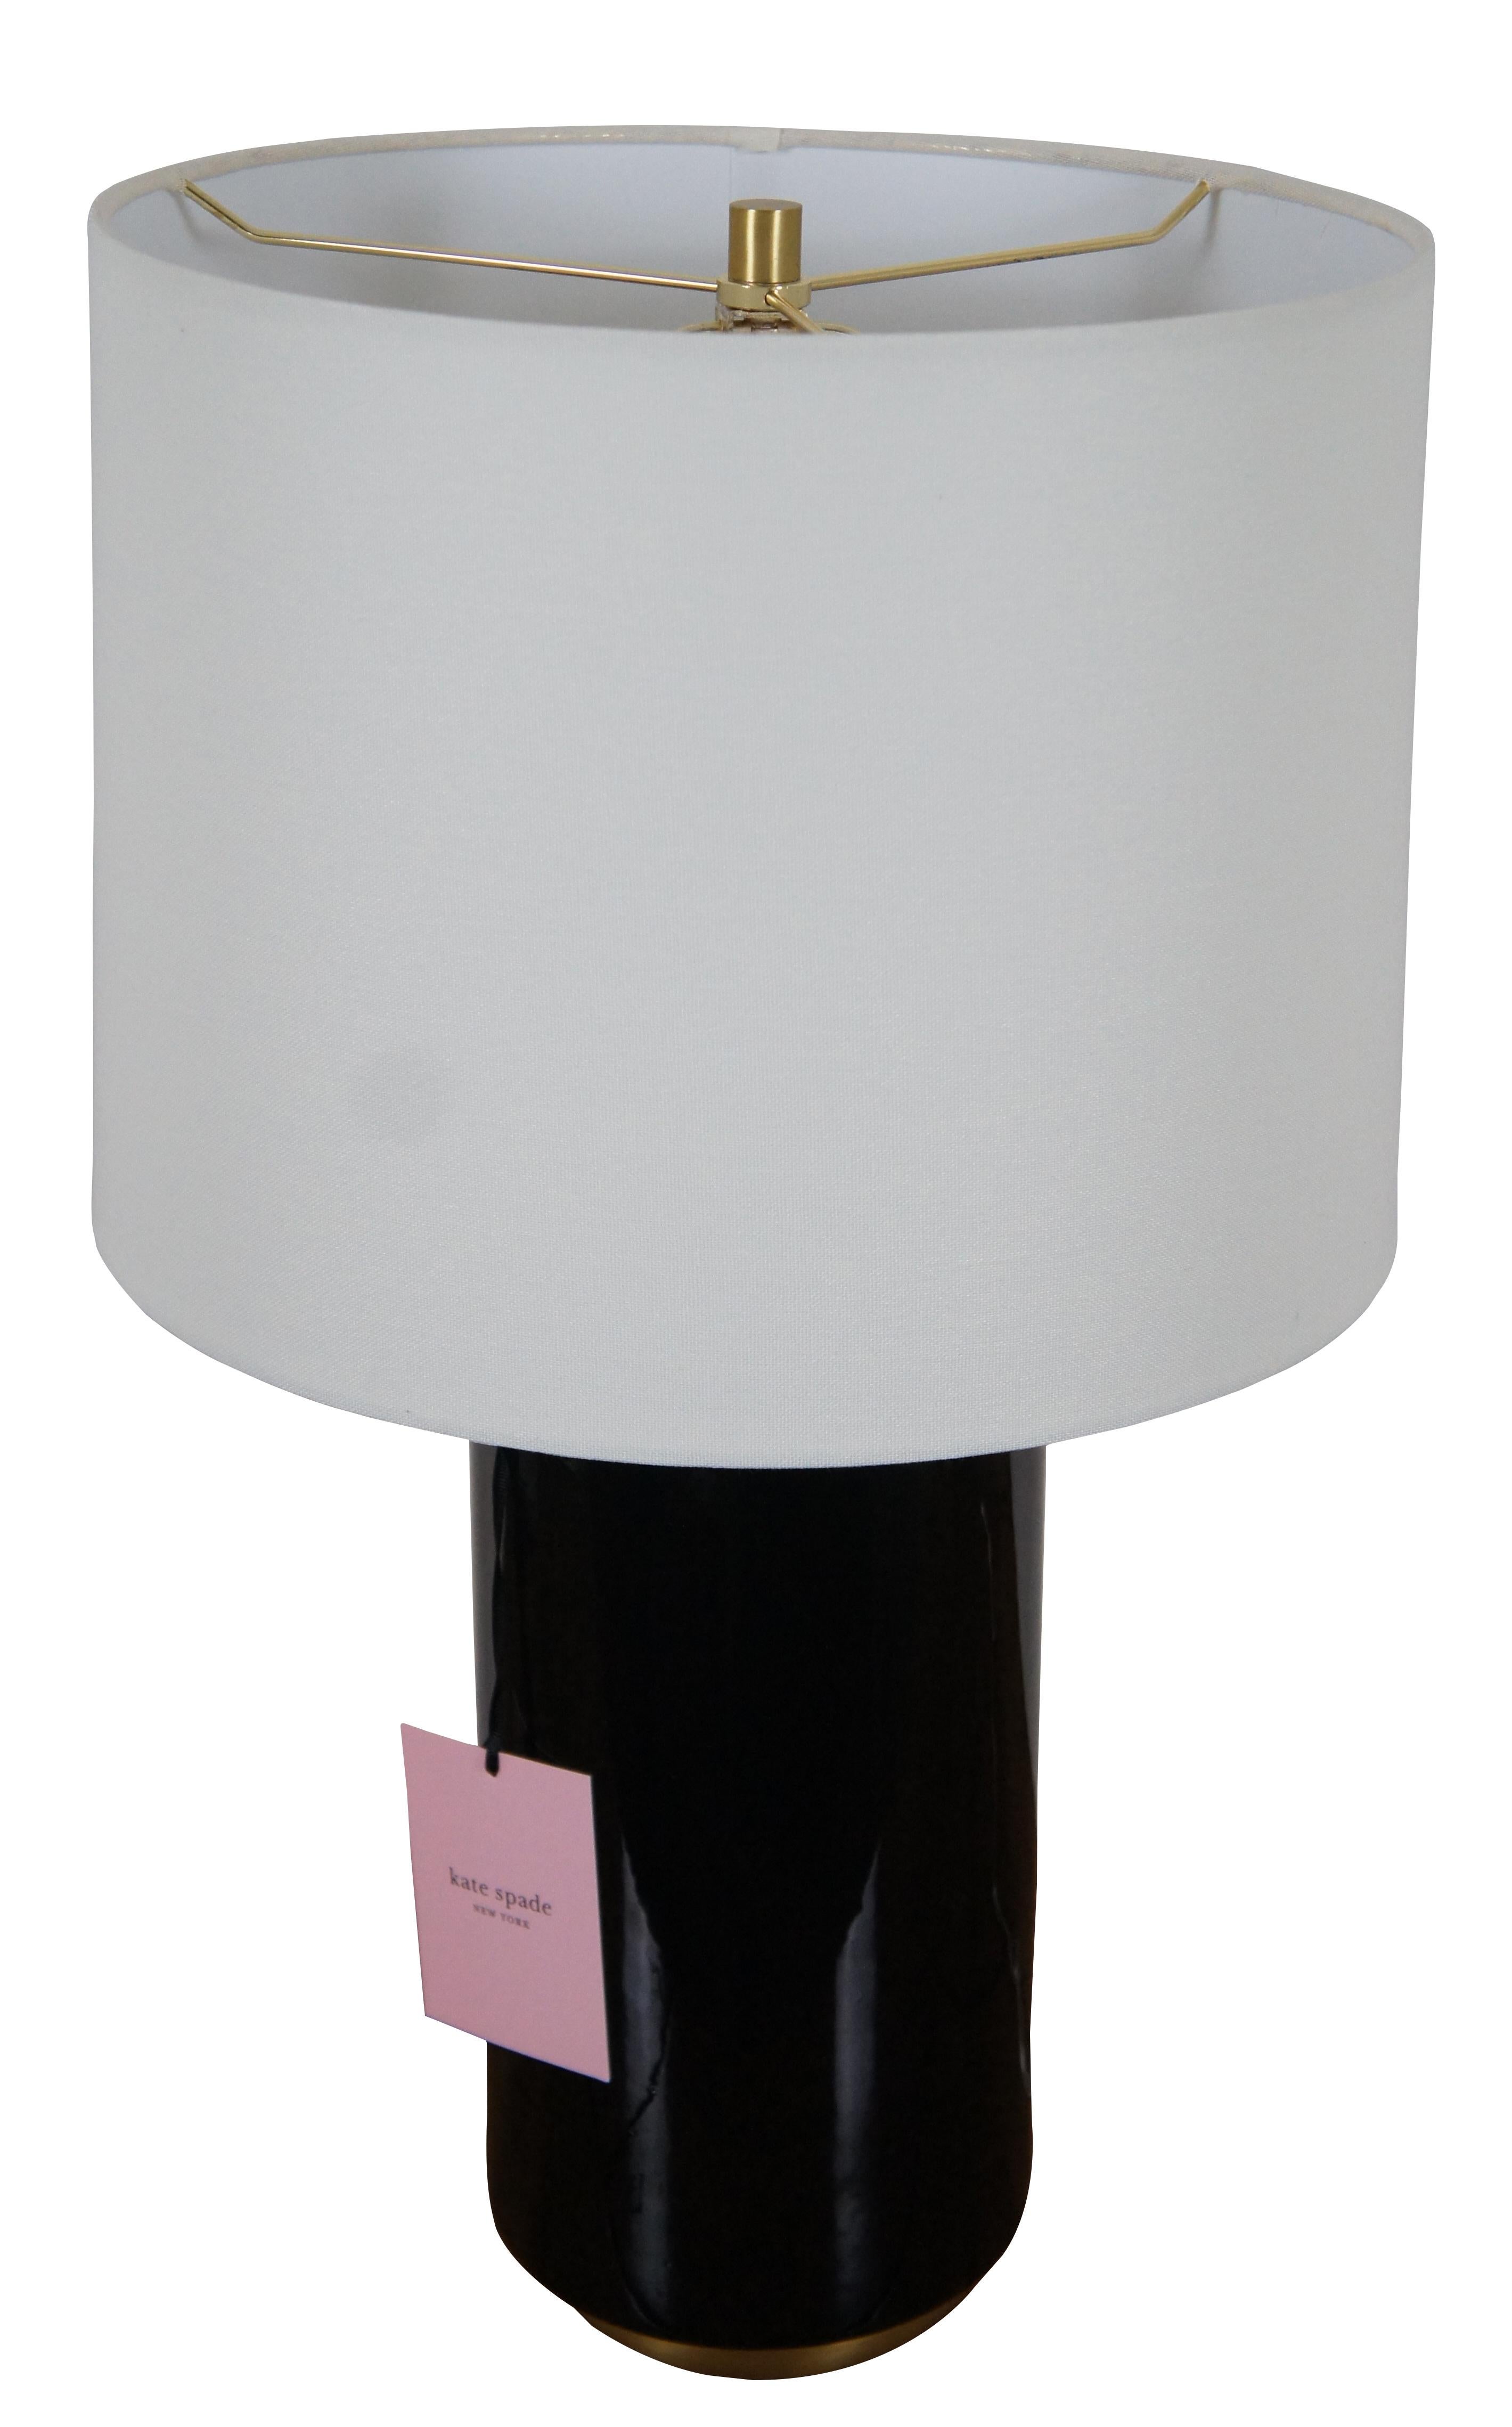 Kate Spade New York black porcelain cylindrical jar shaped table lamp with brushed brass base and top. Includes white shade.

Measures: 6.5” x 18” / shade - 14.5” x 10.75” / total height – 24.75” (diameter x height).